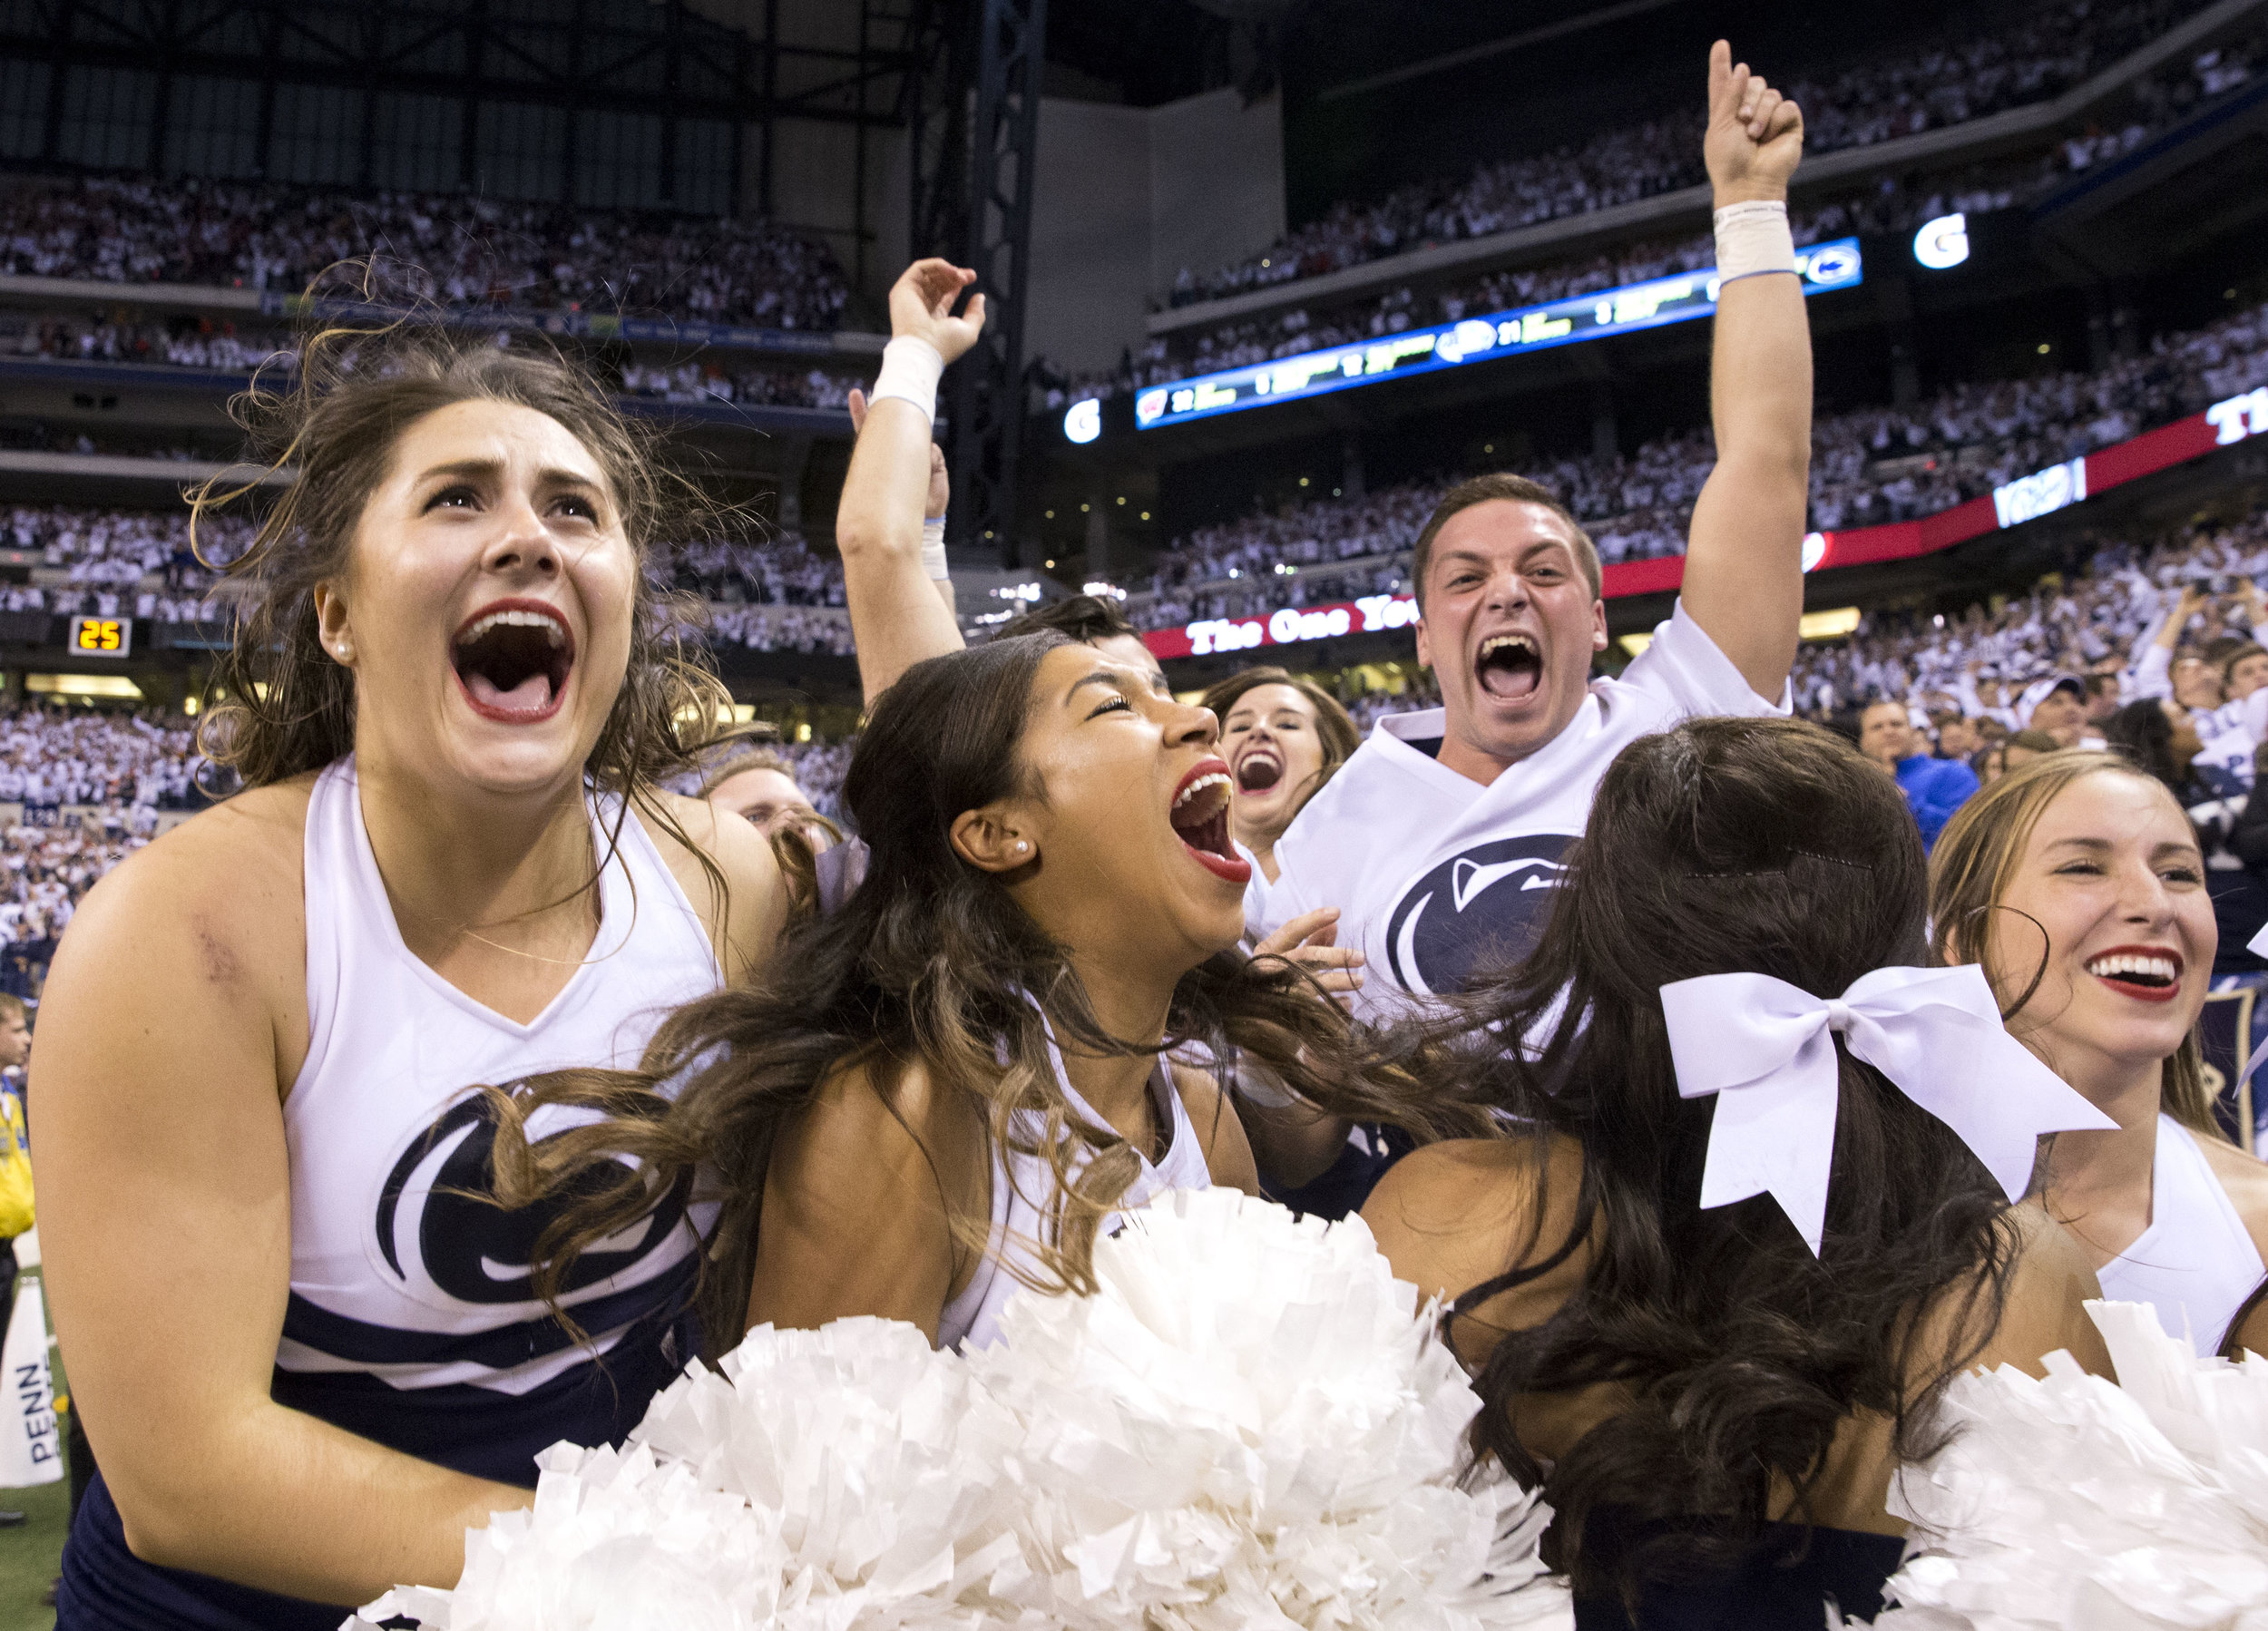  Penn State cheerleaders react after seeing the final minutes in the fourth quarter and realizing that Penn State would be the Big Ten Champions during the Big Ten Football Championship Game between Penn State and Wisconsin at Lucas Oil Stadium in In